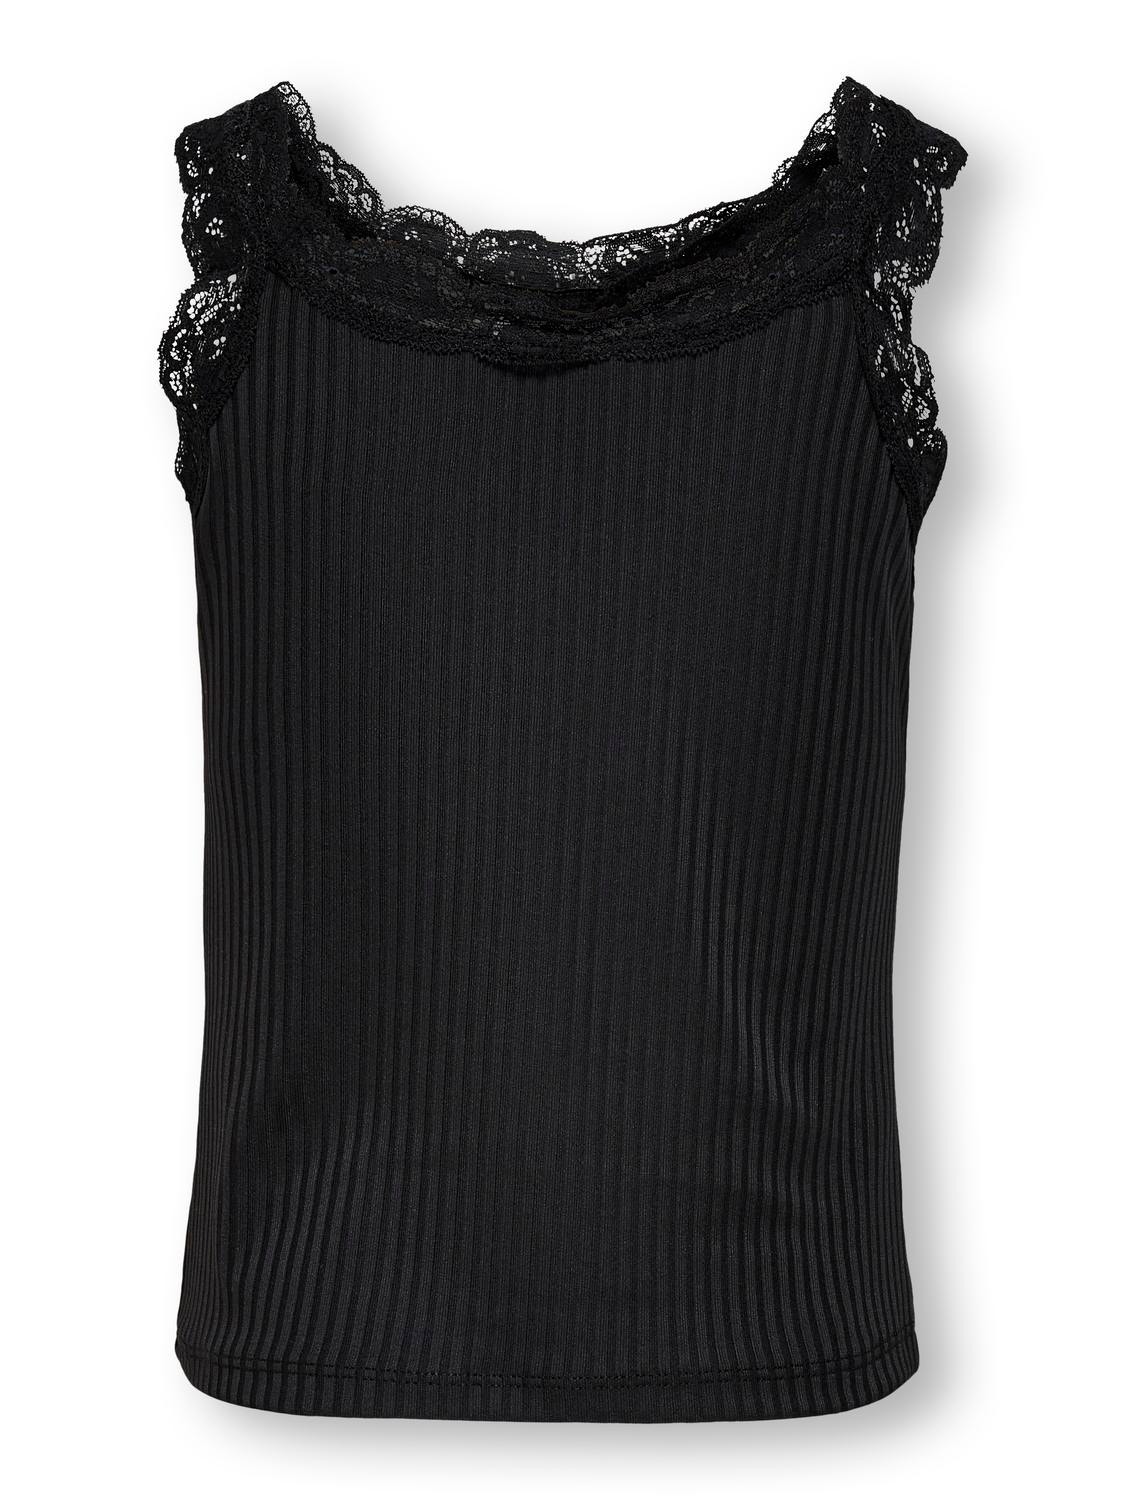 ONLY Lace detail Top -Black - 15240741